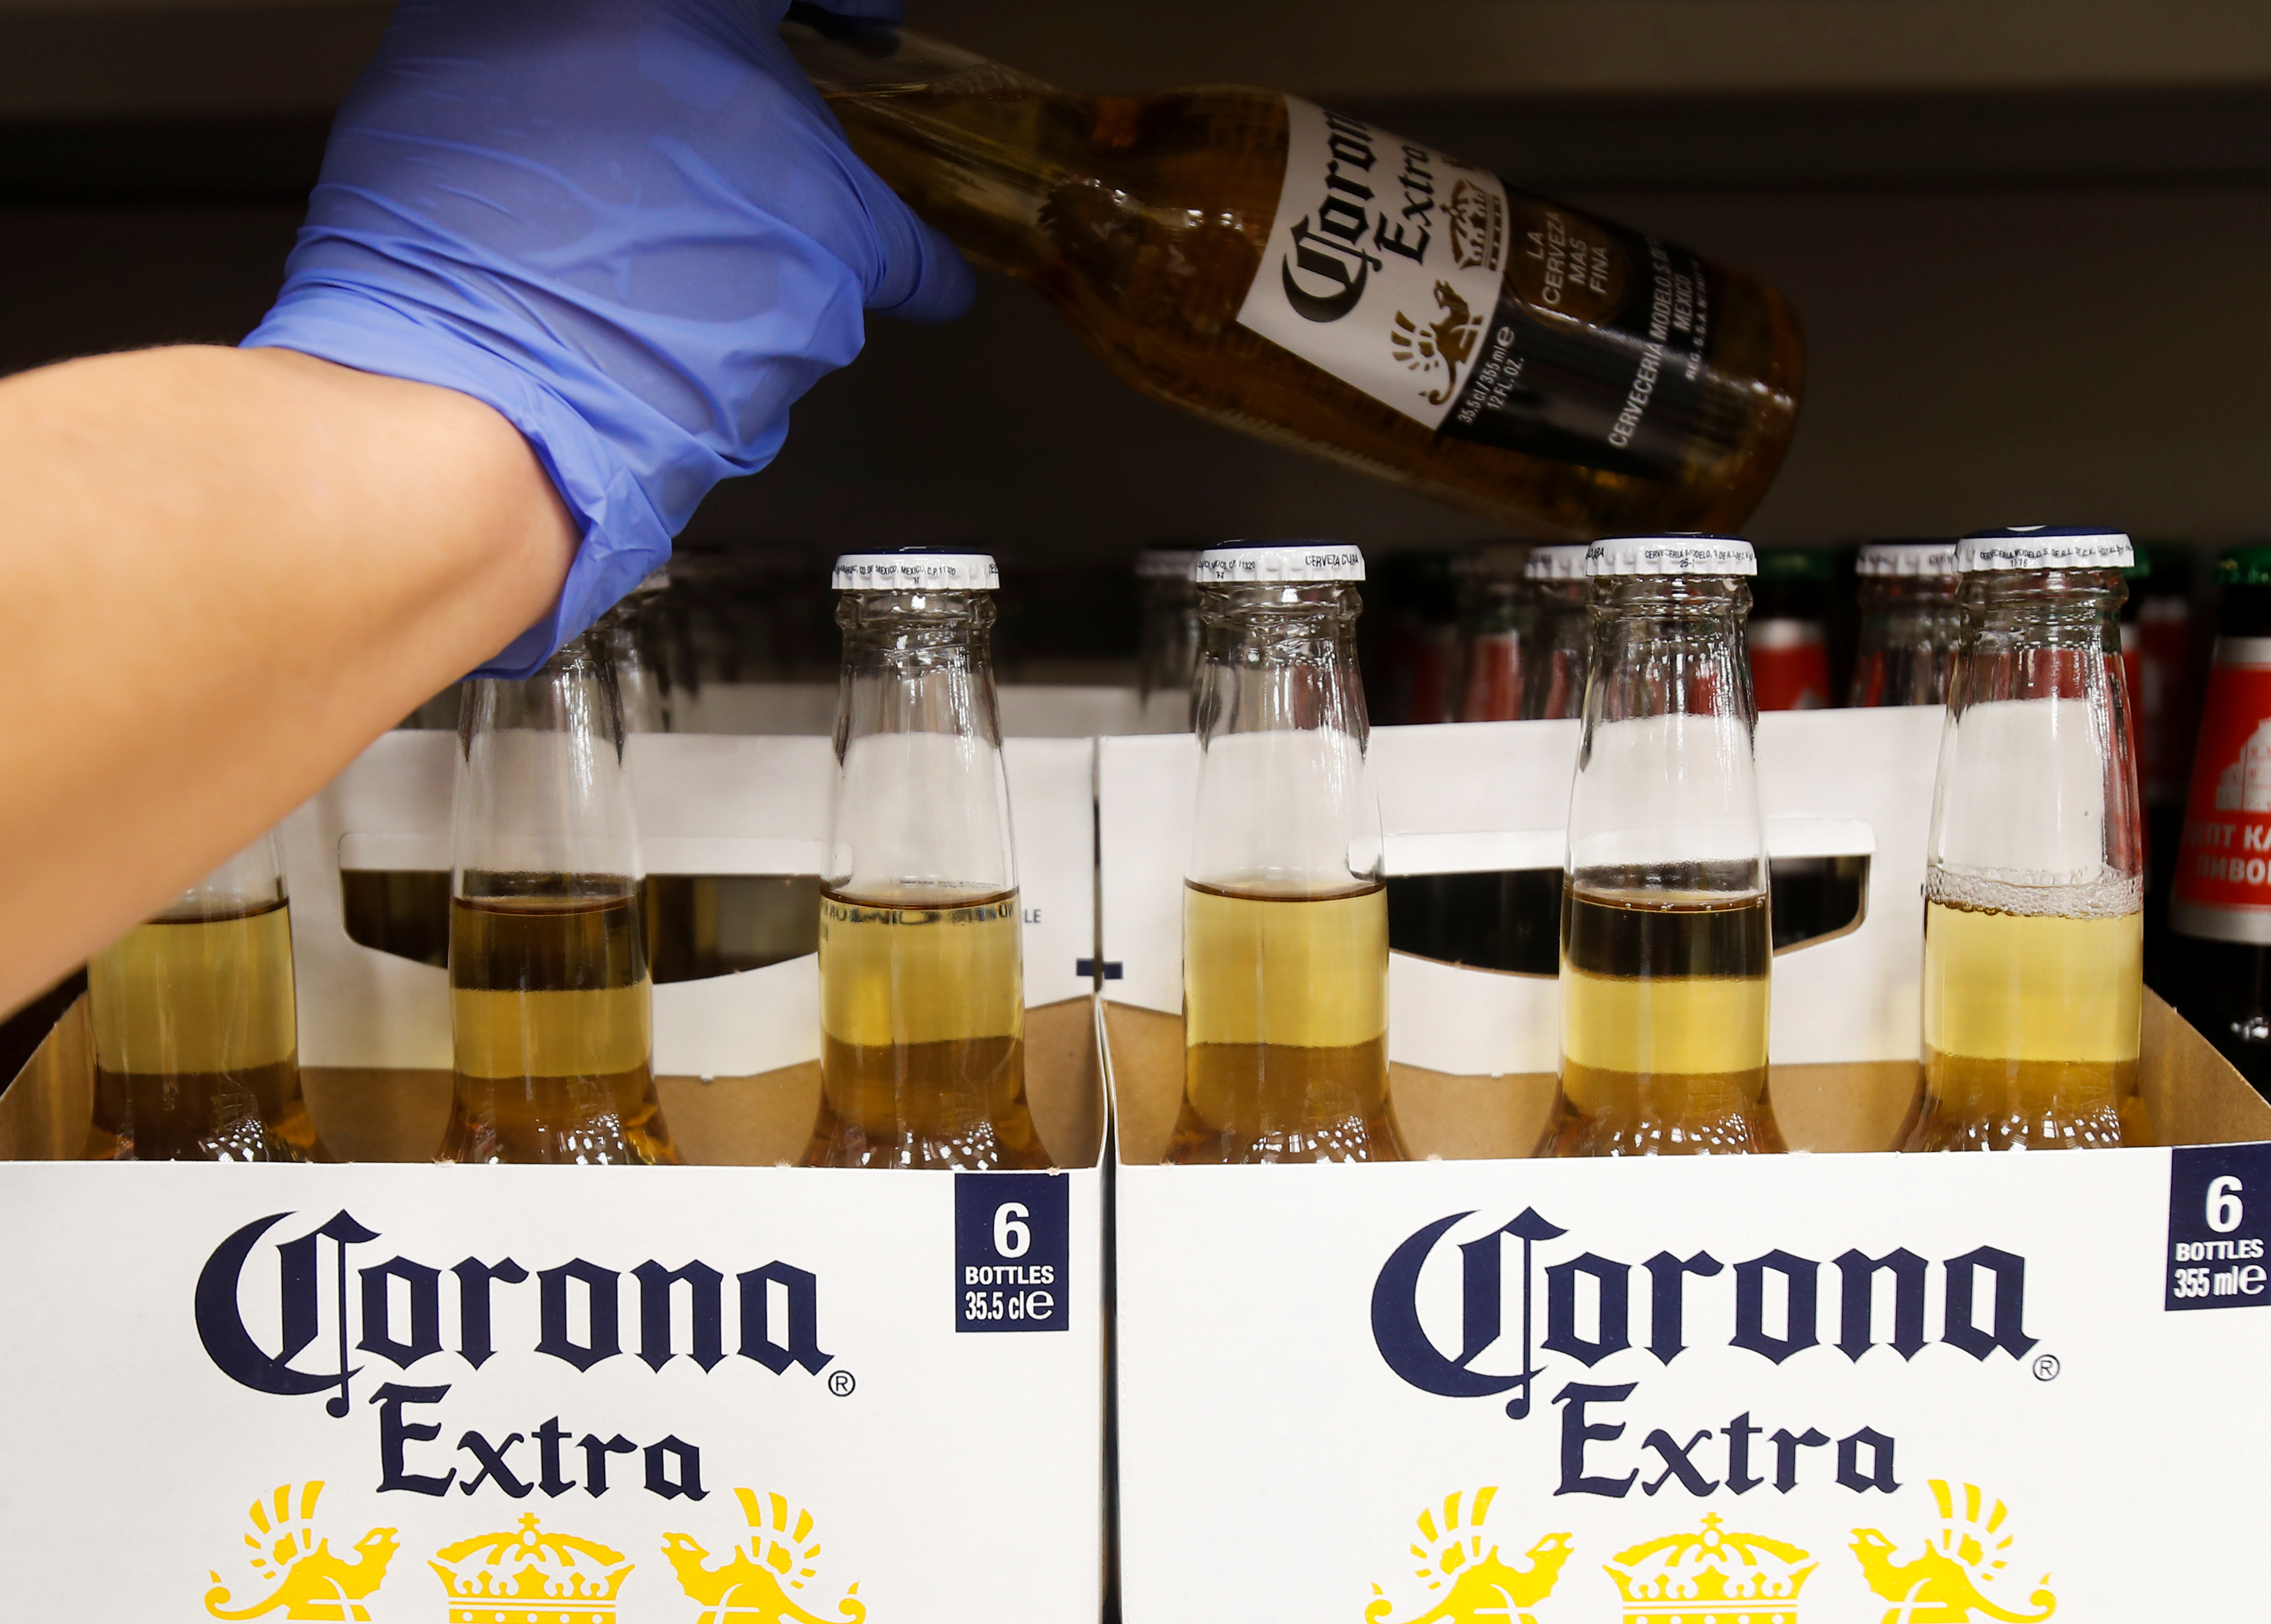 Bottles of Corona Extra beer are displayed for sale in a supermarket in Moscow